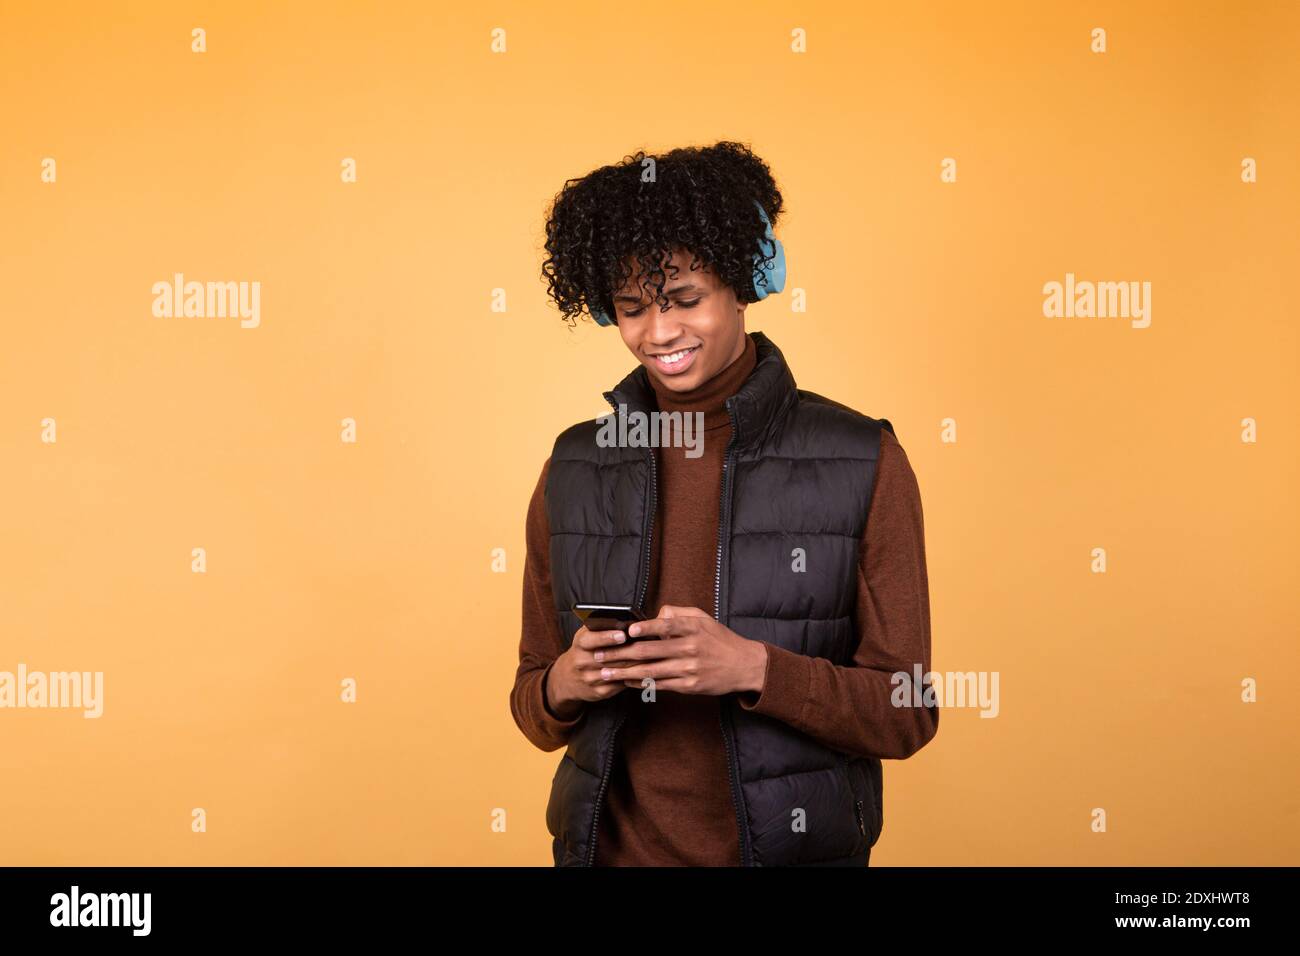 Photo of young man in dark vest holding phone, friends chatting, music modern technology with blue headphones. Isolated image on yellow background. Stock Photo